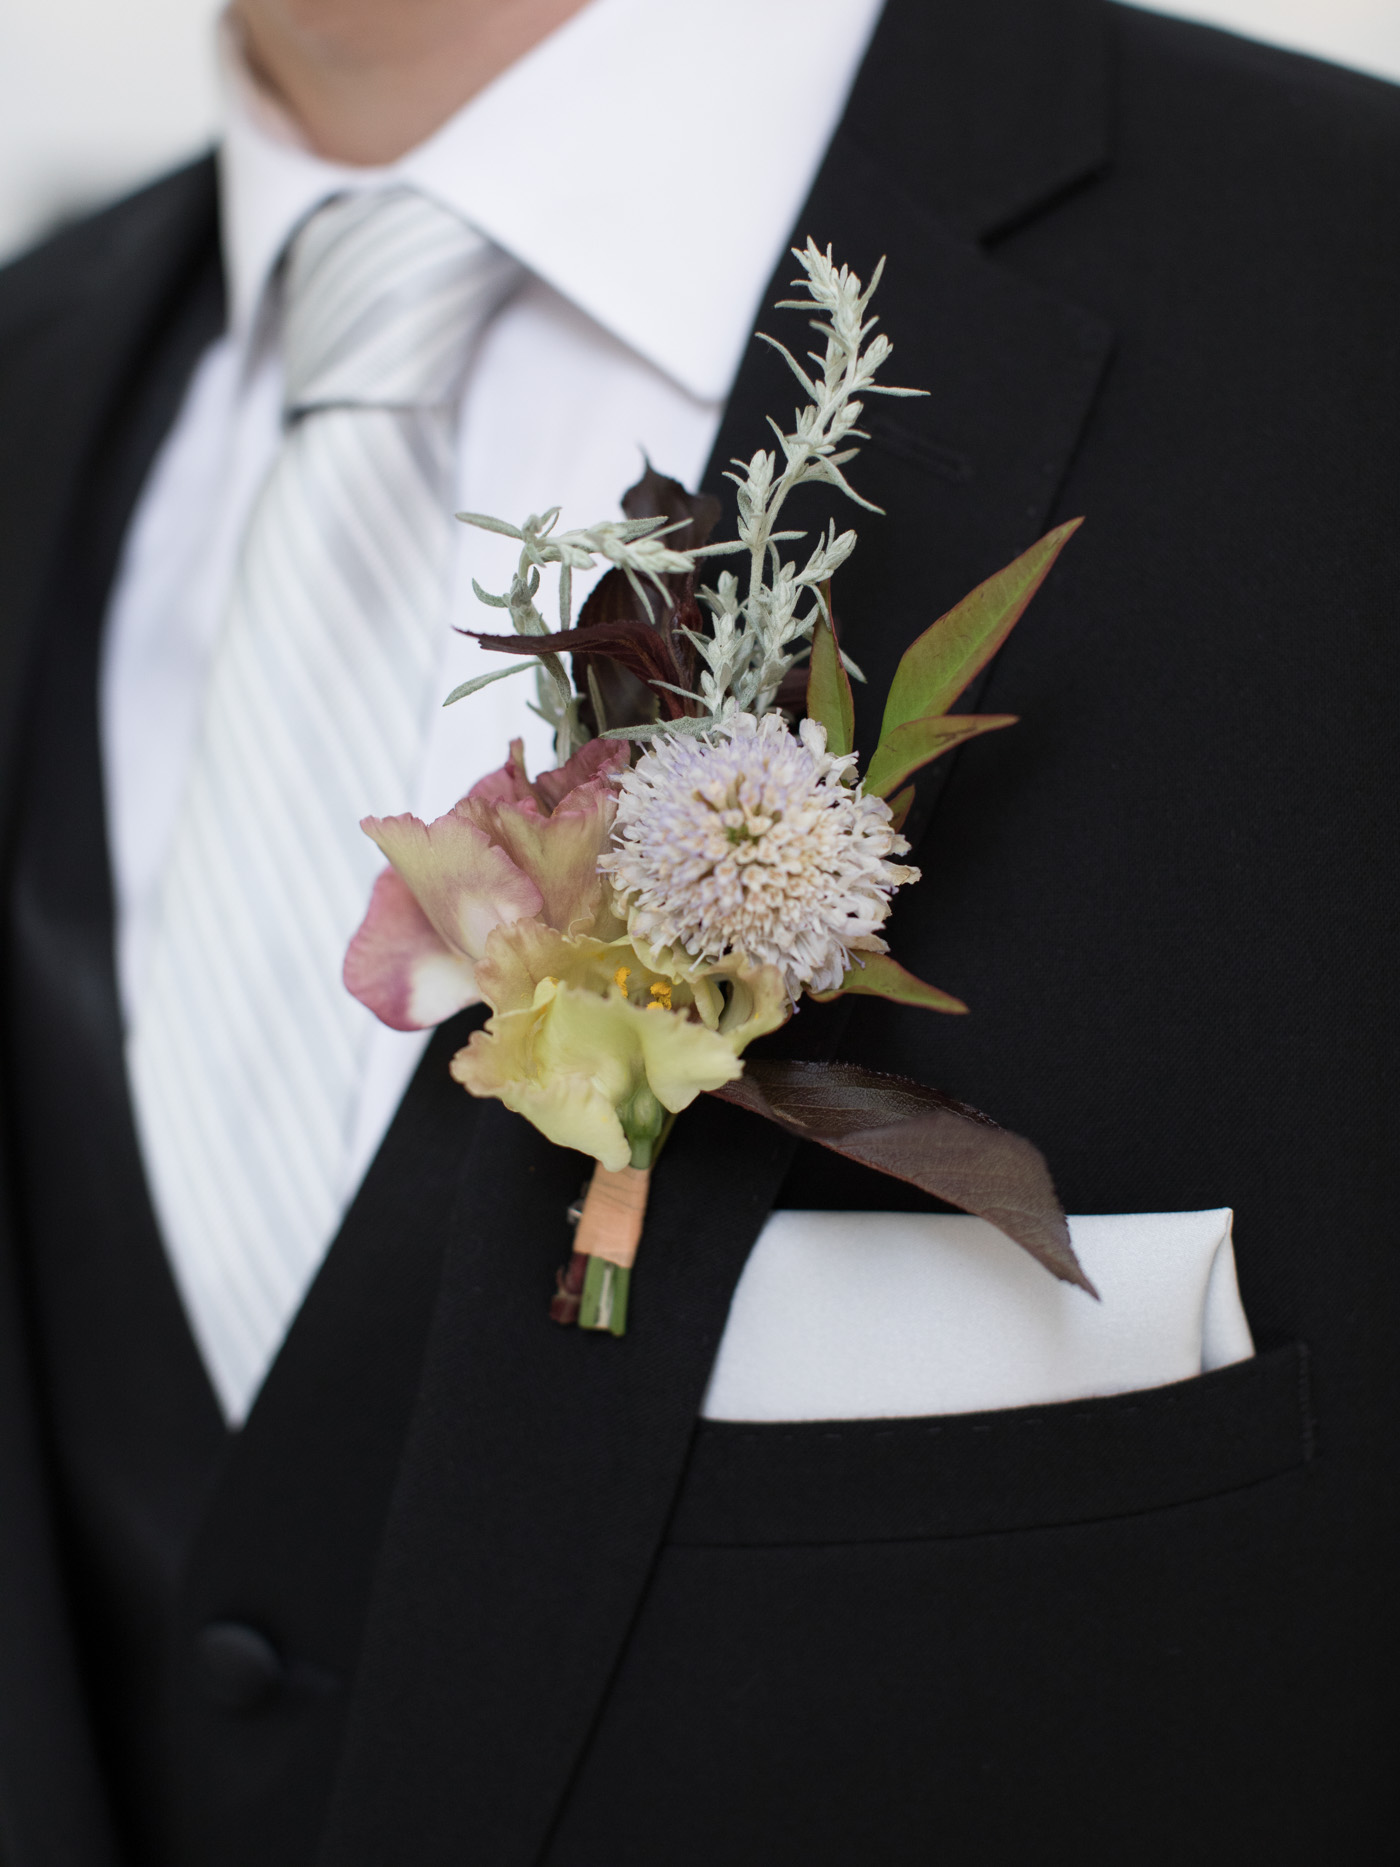 Nature-Inspired_Florals_Boutoneer_Des_Moines Iowa.jpg